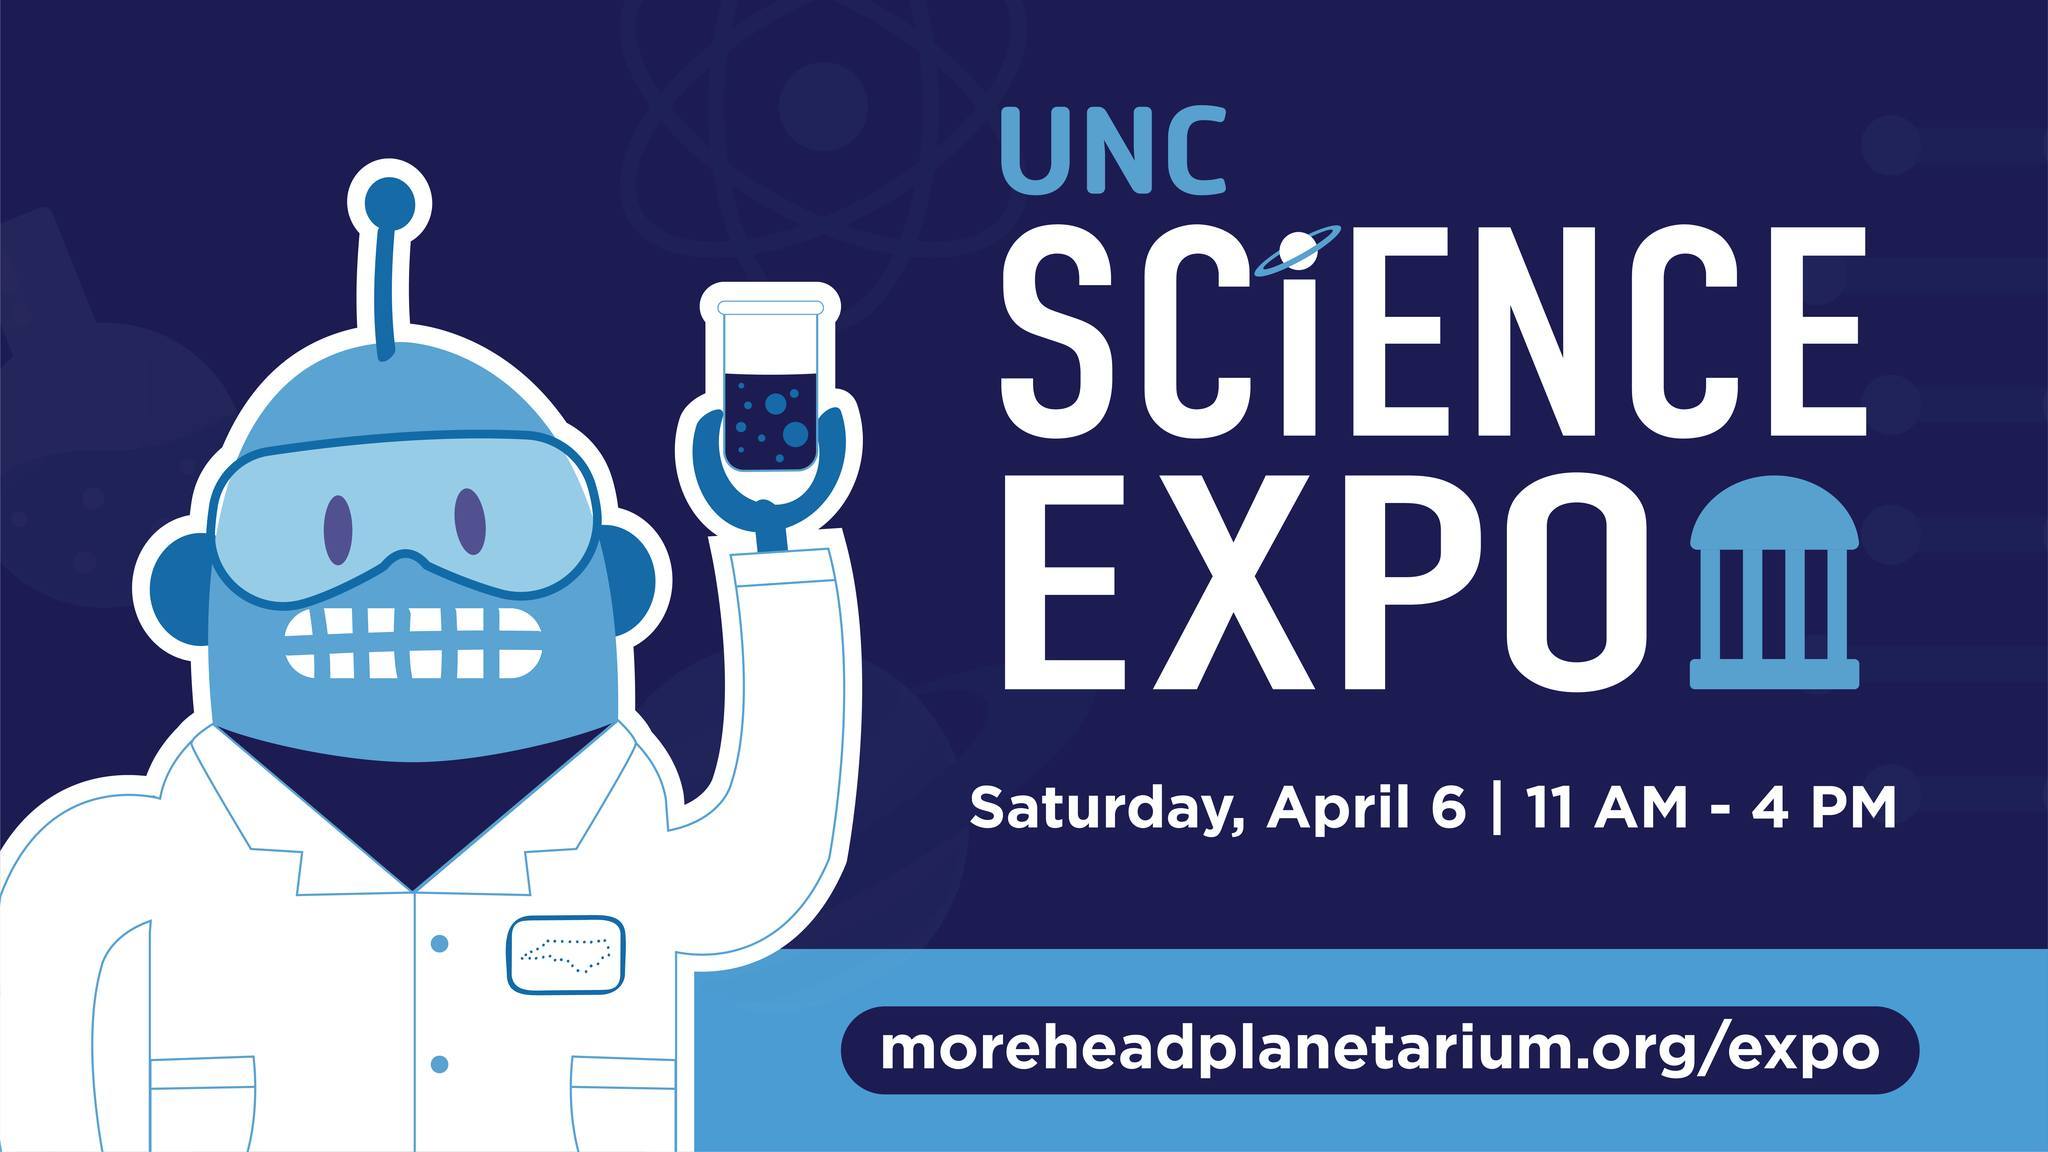 Graphic with Kelvin the Robot, noting that the UNC Science Expo will be held 11 a.m. to 4 p.m. on Saturday, April 6.